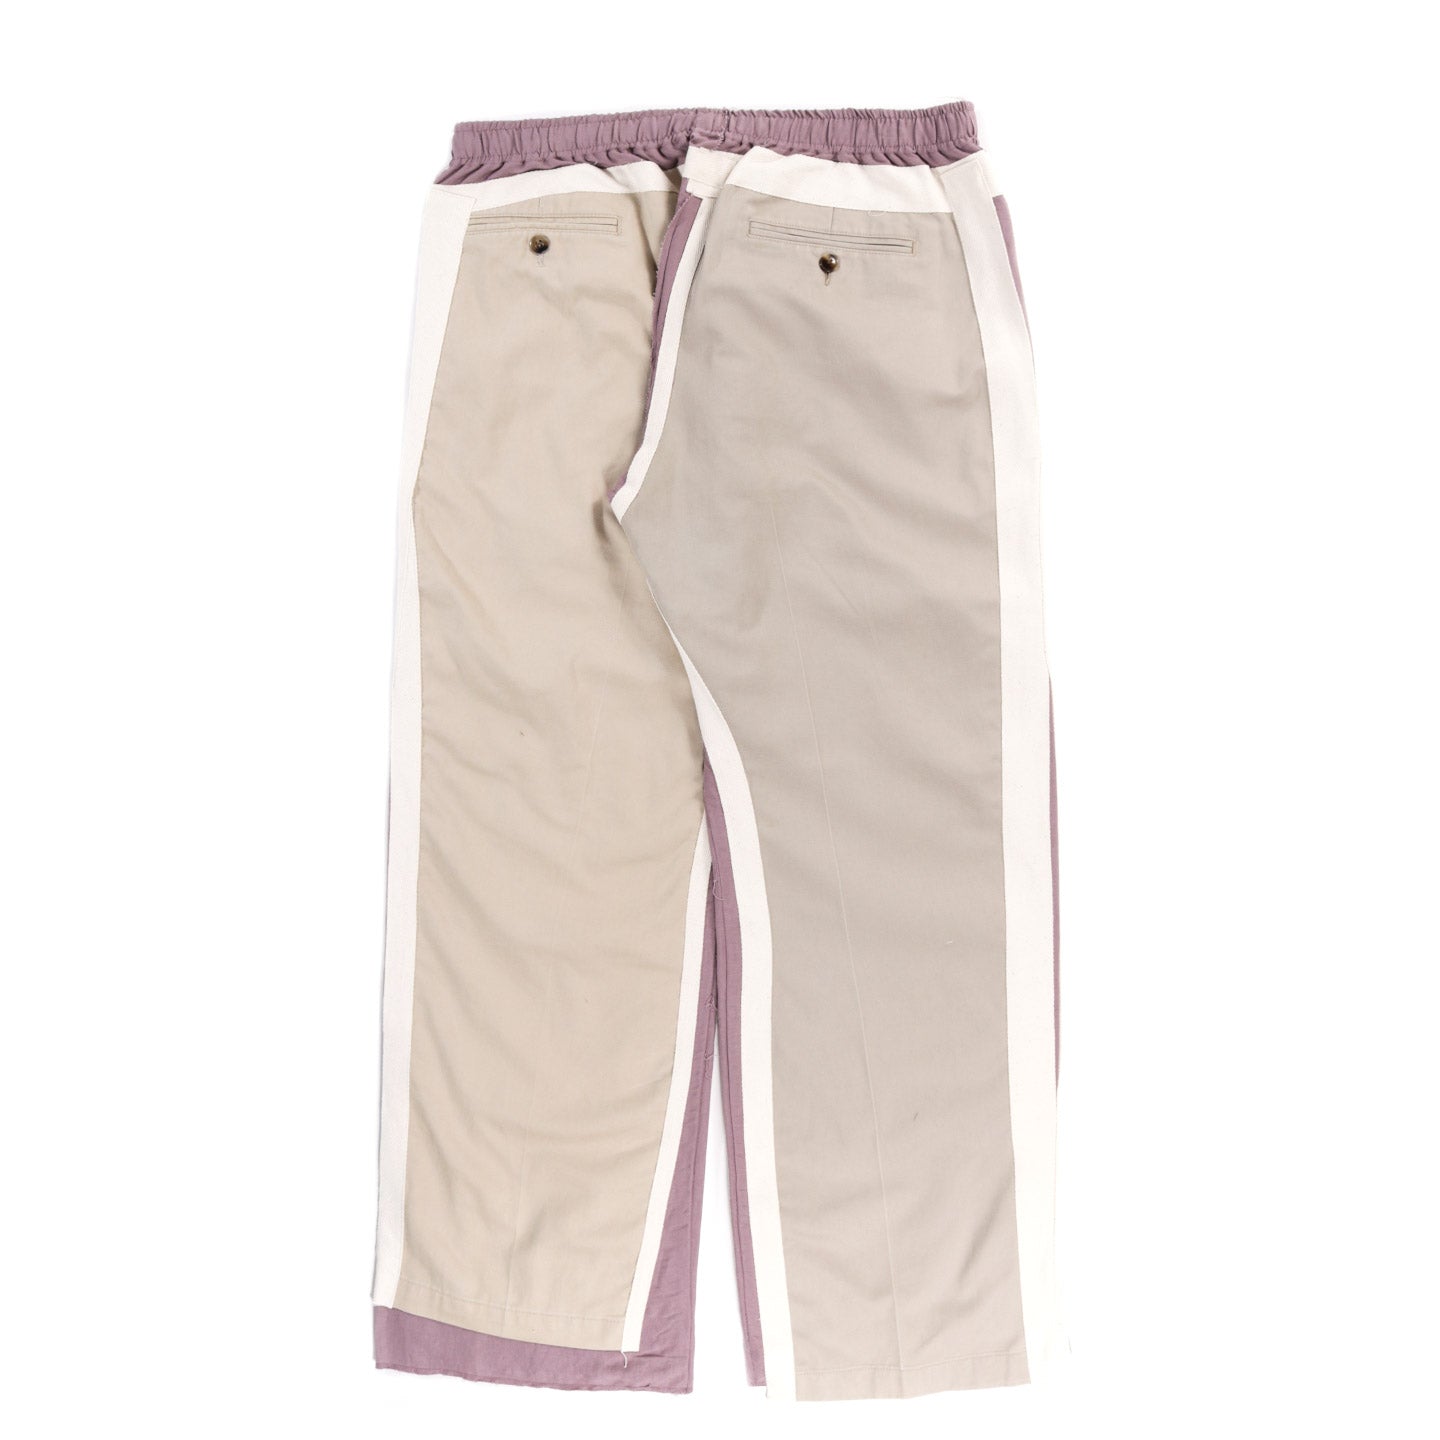 REBUILD BY NEEDLES CHINO COVERED PANT SALMON - L (B)